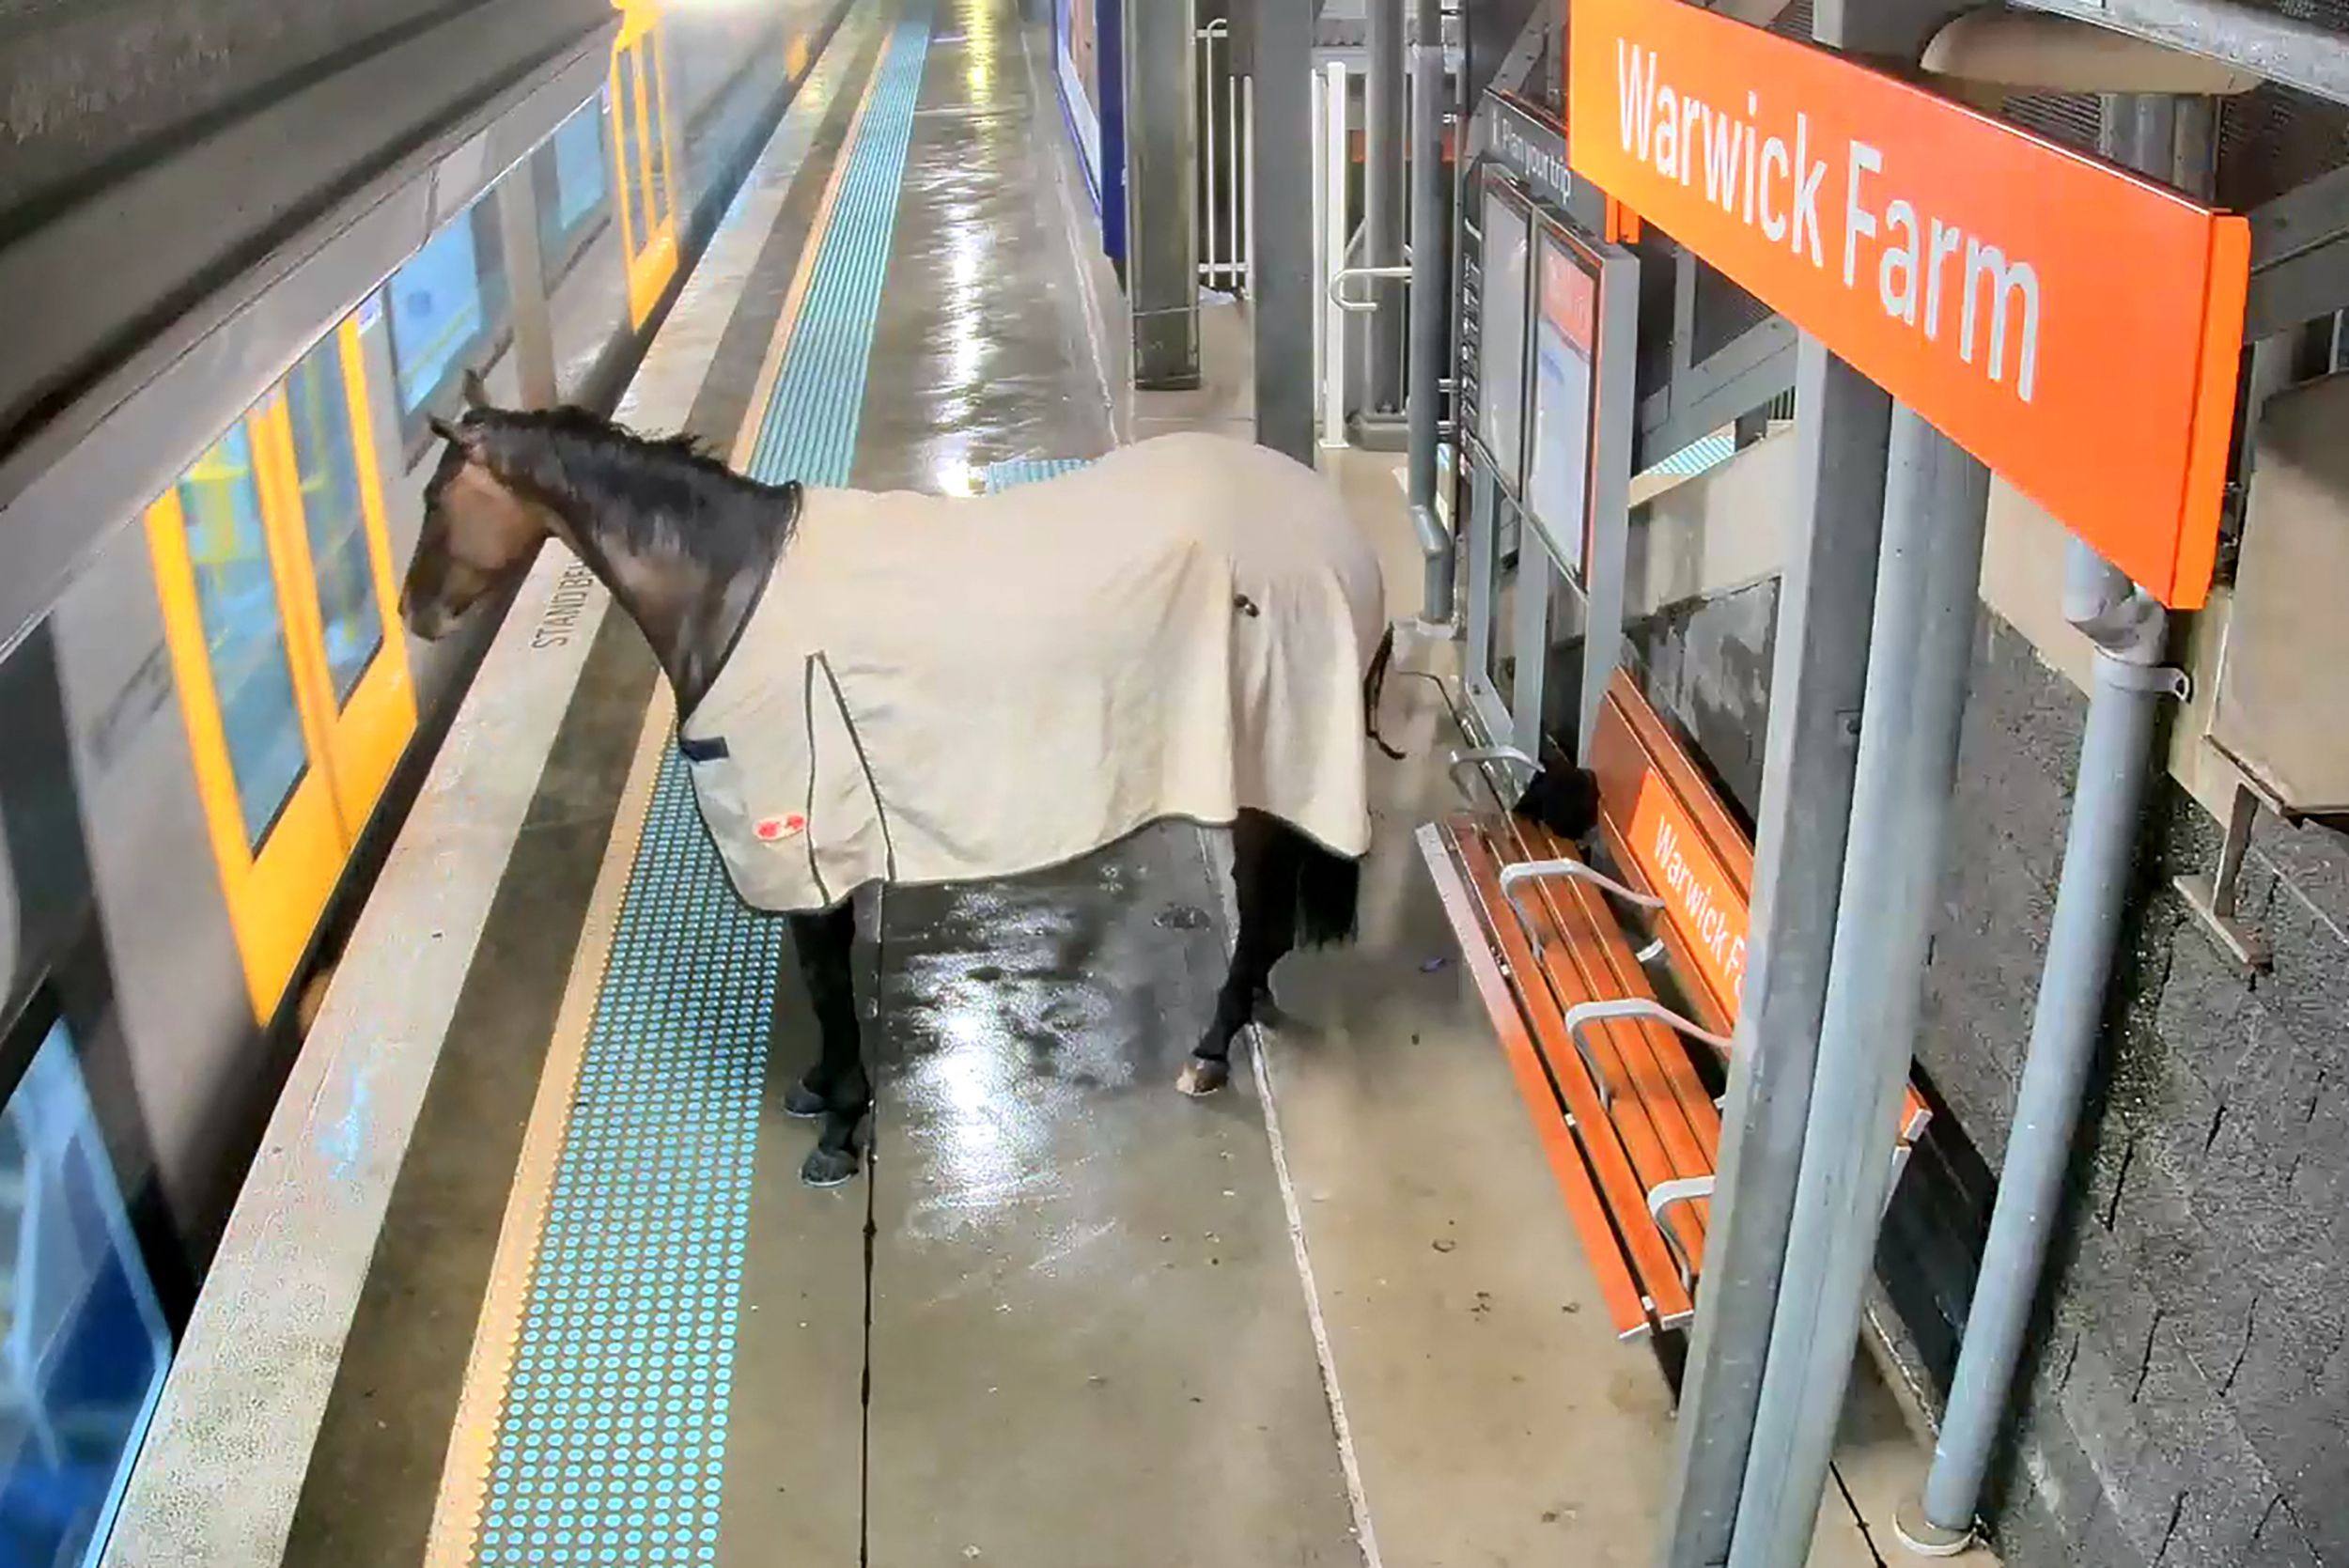 This frame grab shows security footage of a rogue racehorse at a train station in outer Sydney. Photo: AFP/Transport of NSW